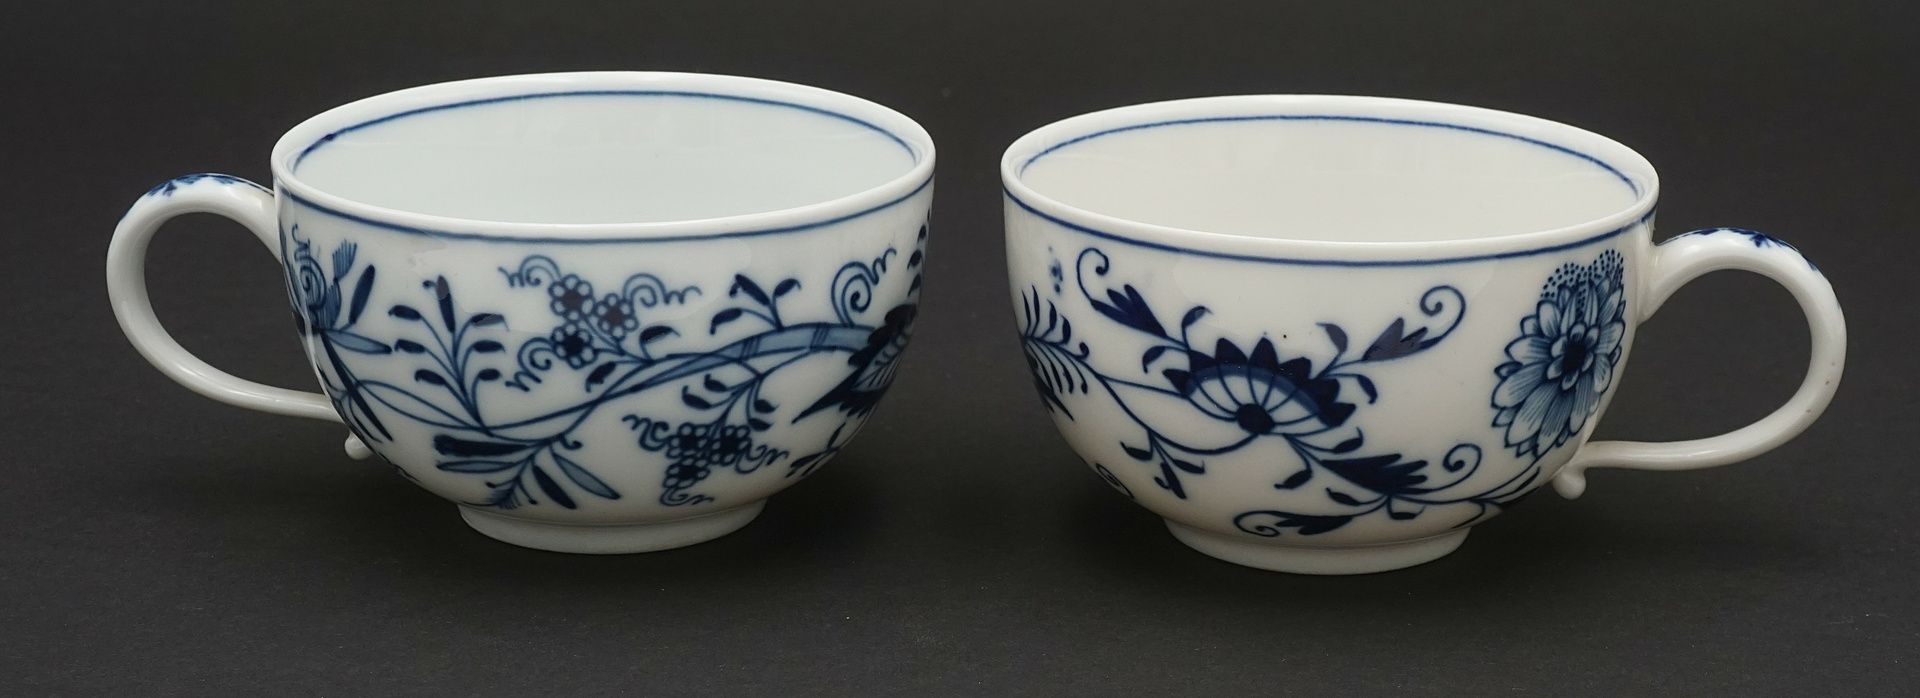 Three Meissen cups and a saucer - Image 3 of 5